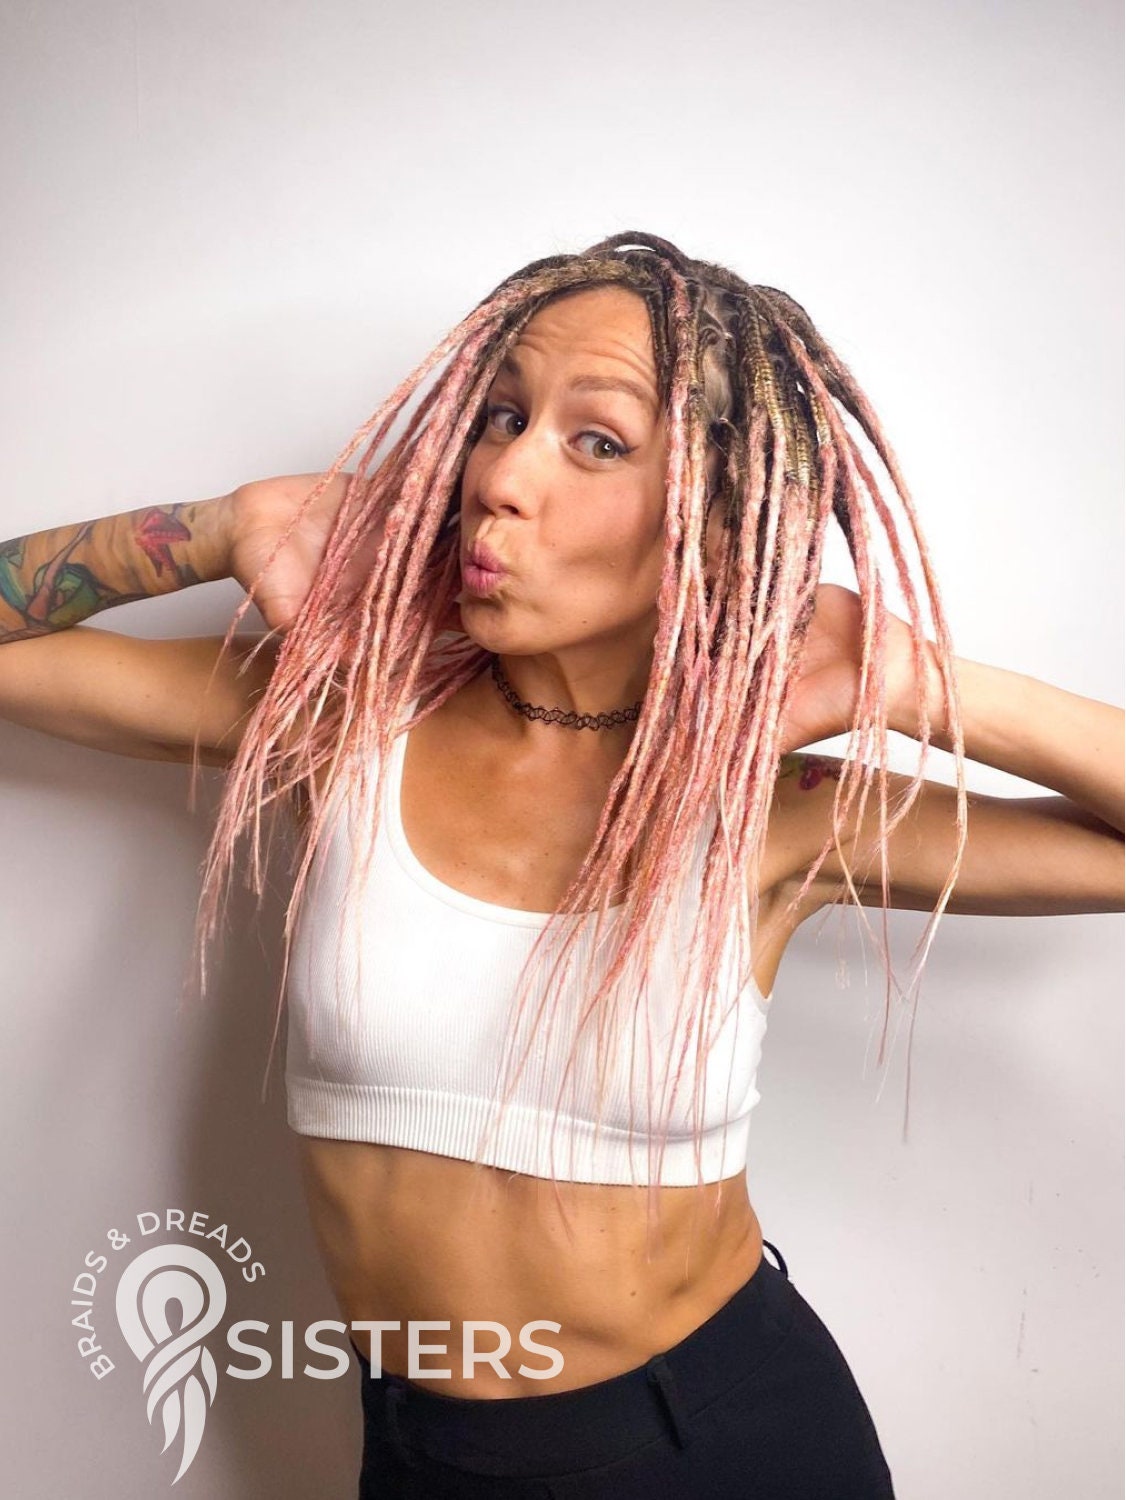 Crochet dreads set brown with pink – Hairful Things